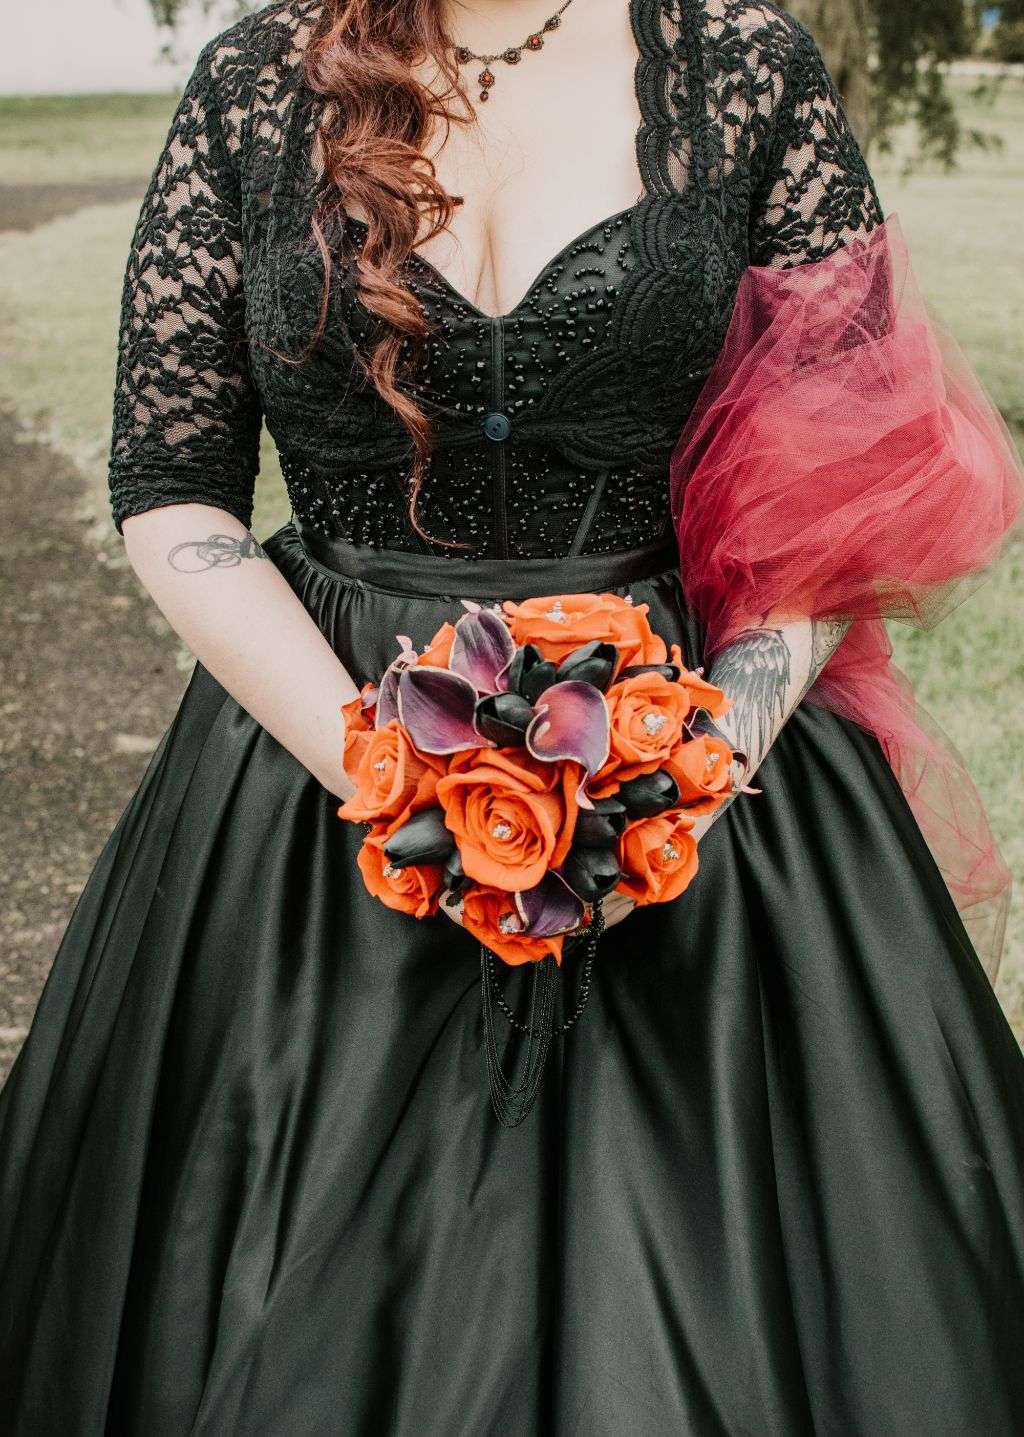 Gorgeous Halloween Wedding Costumes for Guests